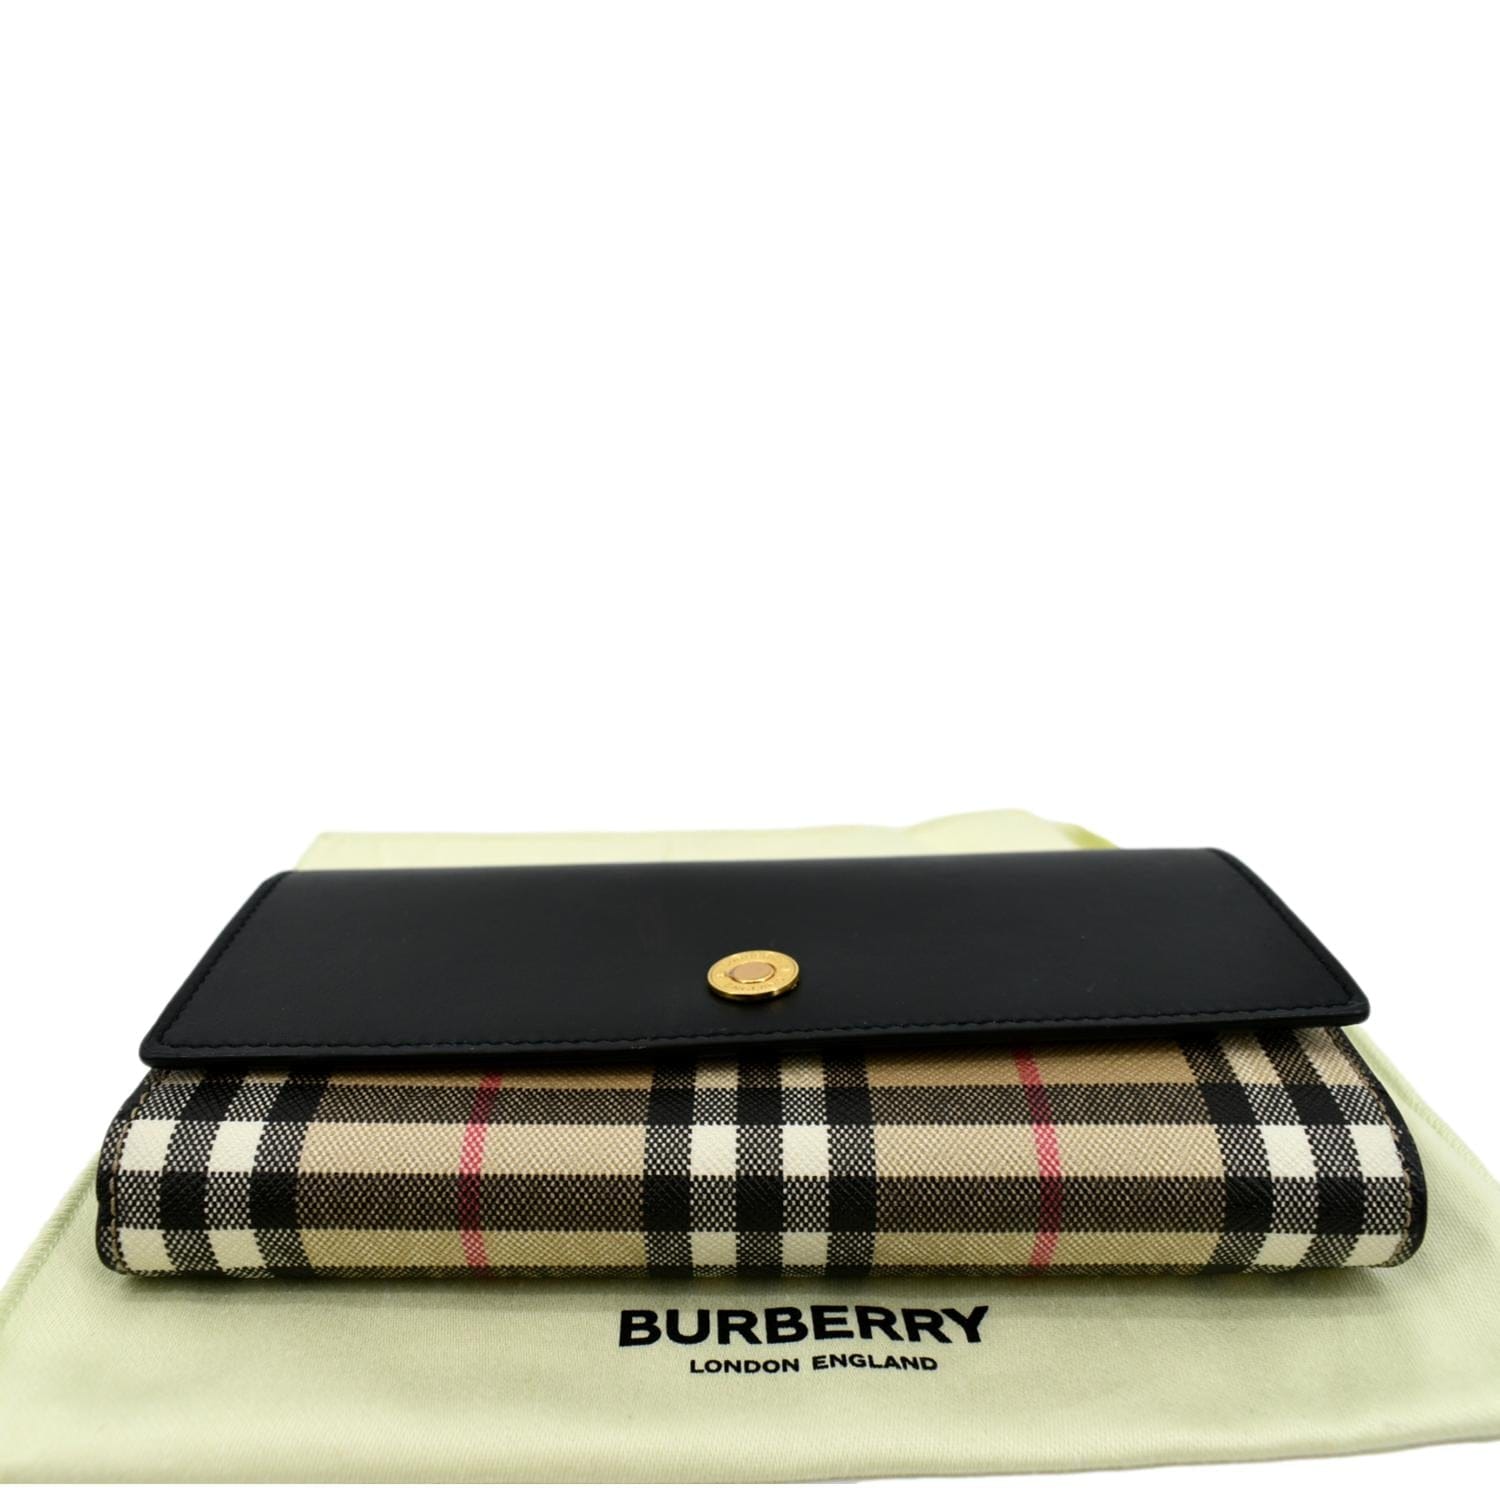 Burberry, Bags, Vintage Burberry Wallet